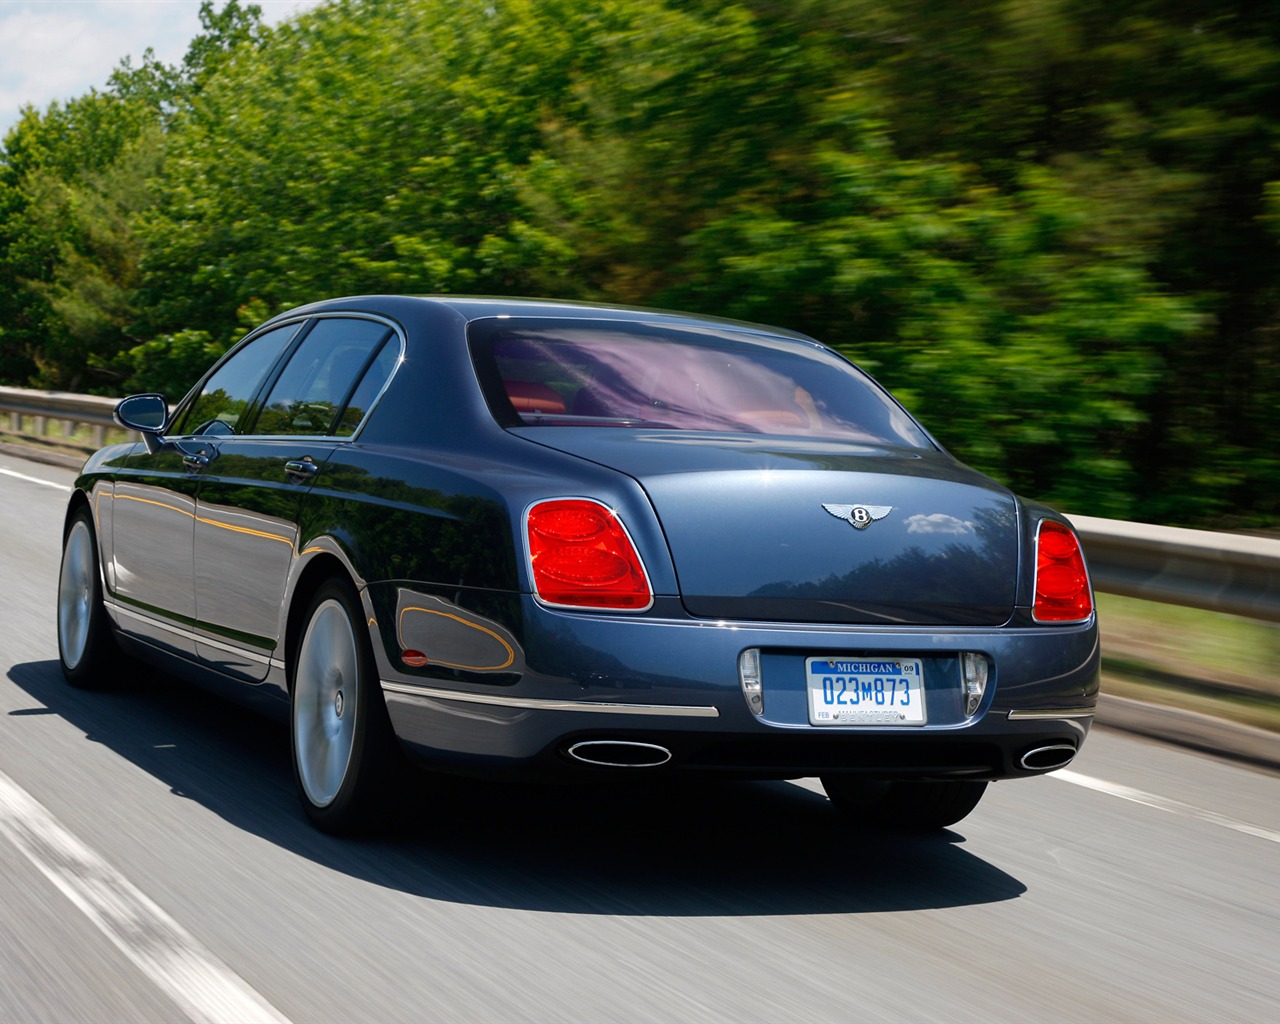 Bentley Continental Flying Spur Speed - 2008 賓利 #12 - 1280x1024